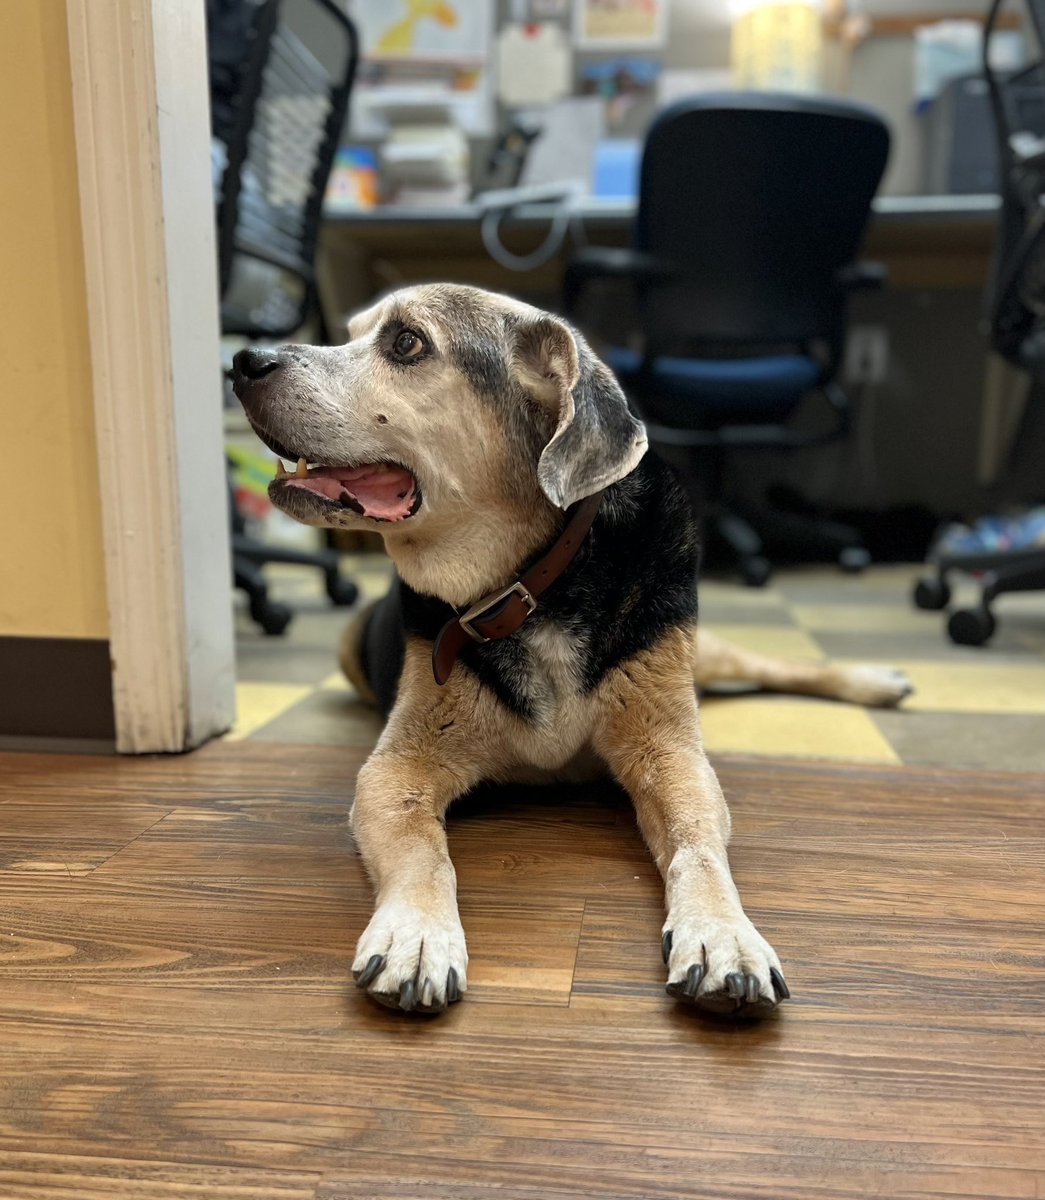 Friends: Our dear shop dog boss, Opie, has passed away. Opie was the beloved companion of general manager Andy and his wife Mary, but he was also “our” dog in the way that all the shop dogs are family to all the shop people.